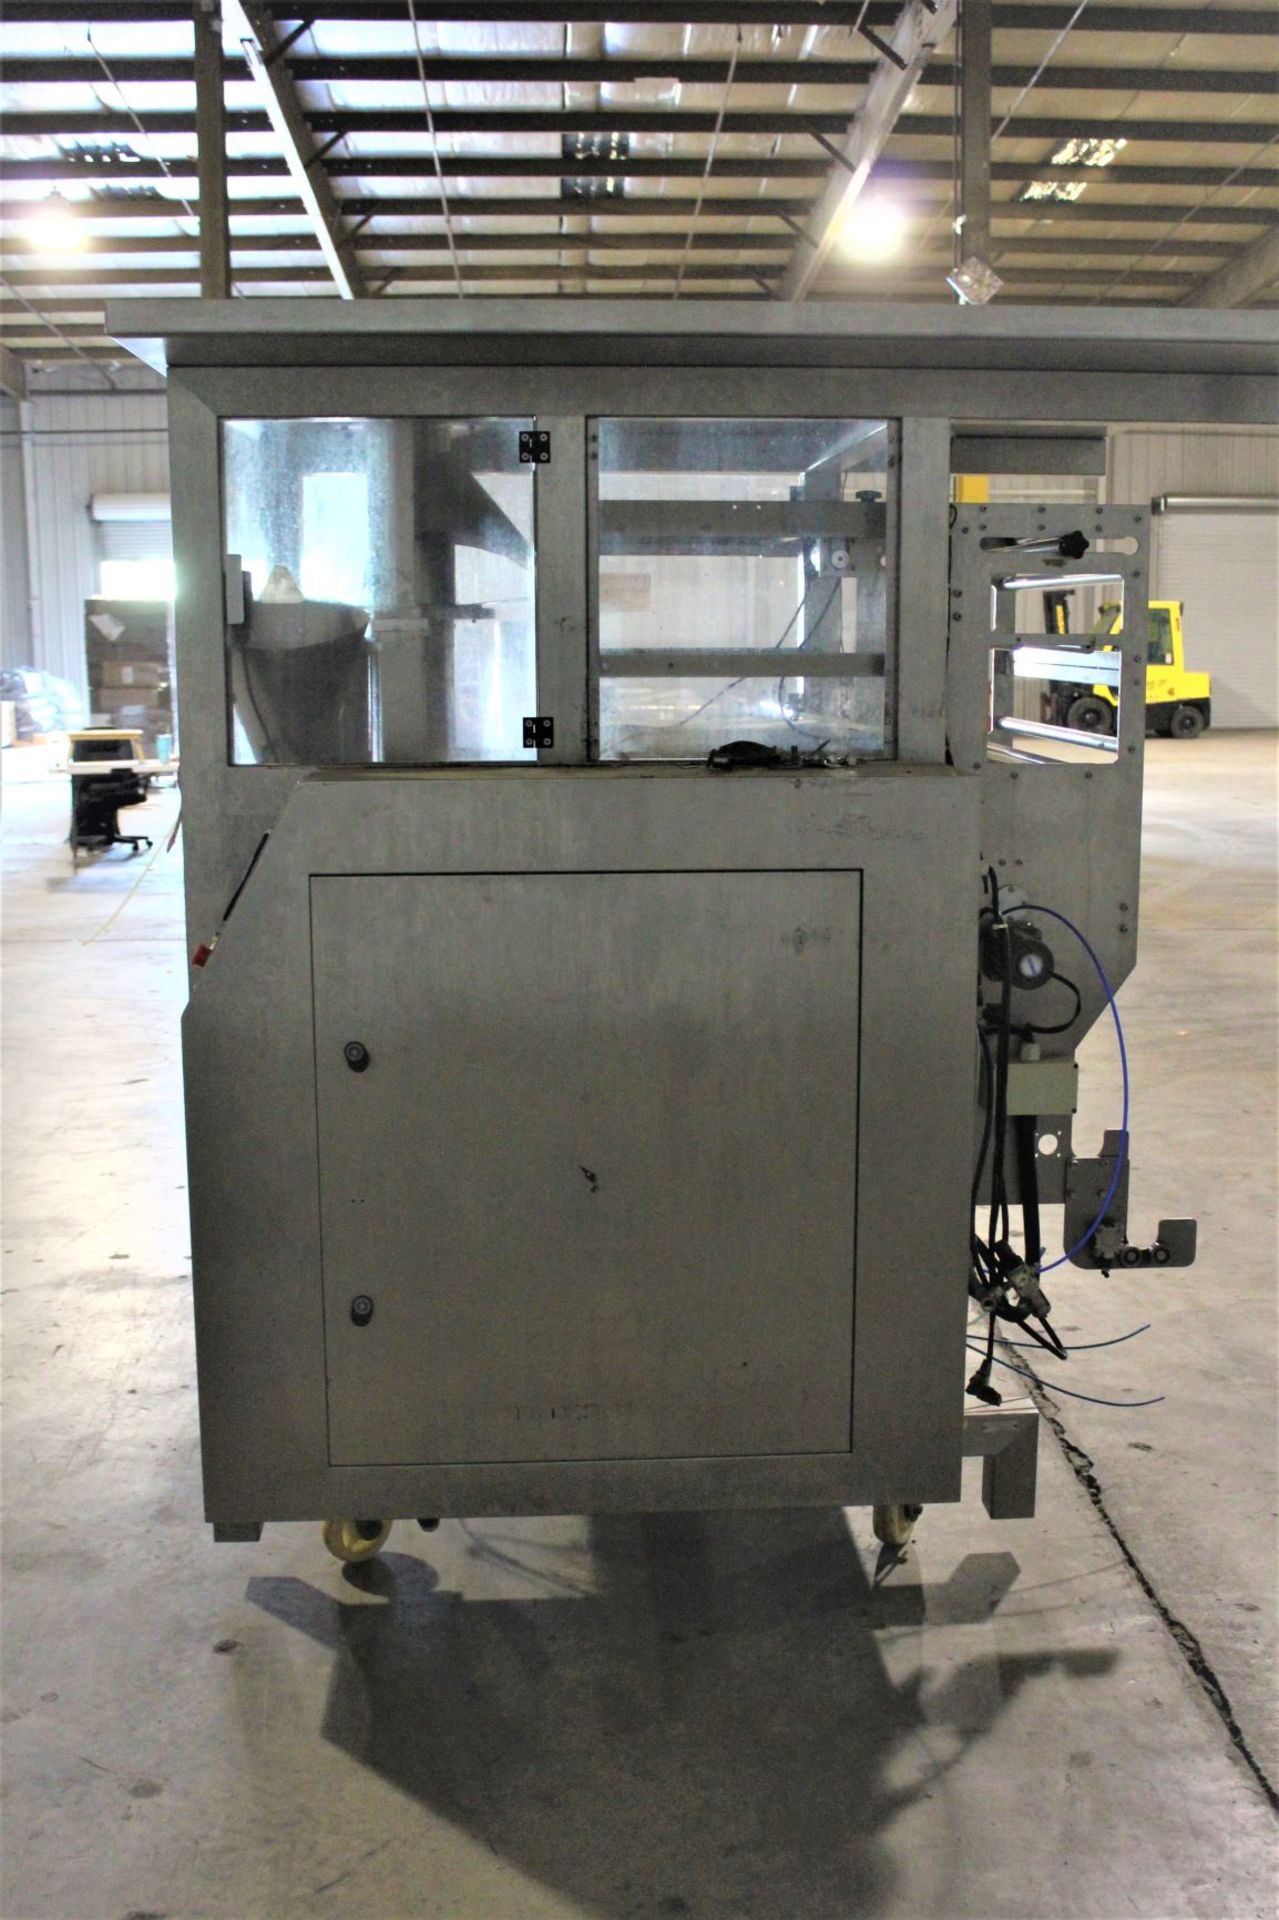 Ohlson Automatic Form Fill & Seal Machine, VFFX Series, Item# bbncohlsonBagvffx, Located in: - Image 2 of 7